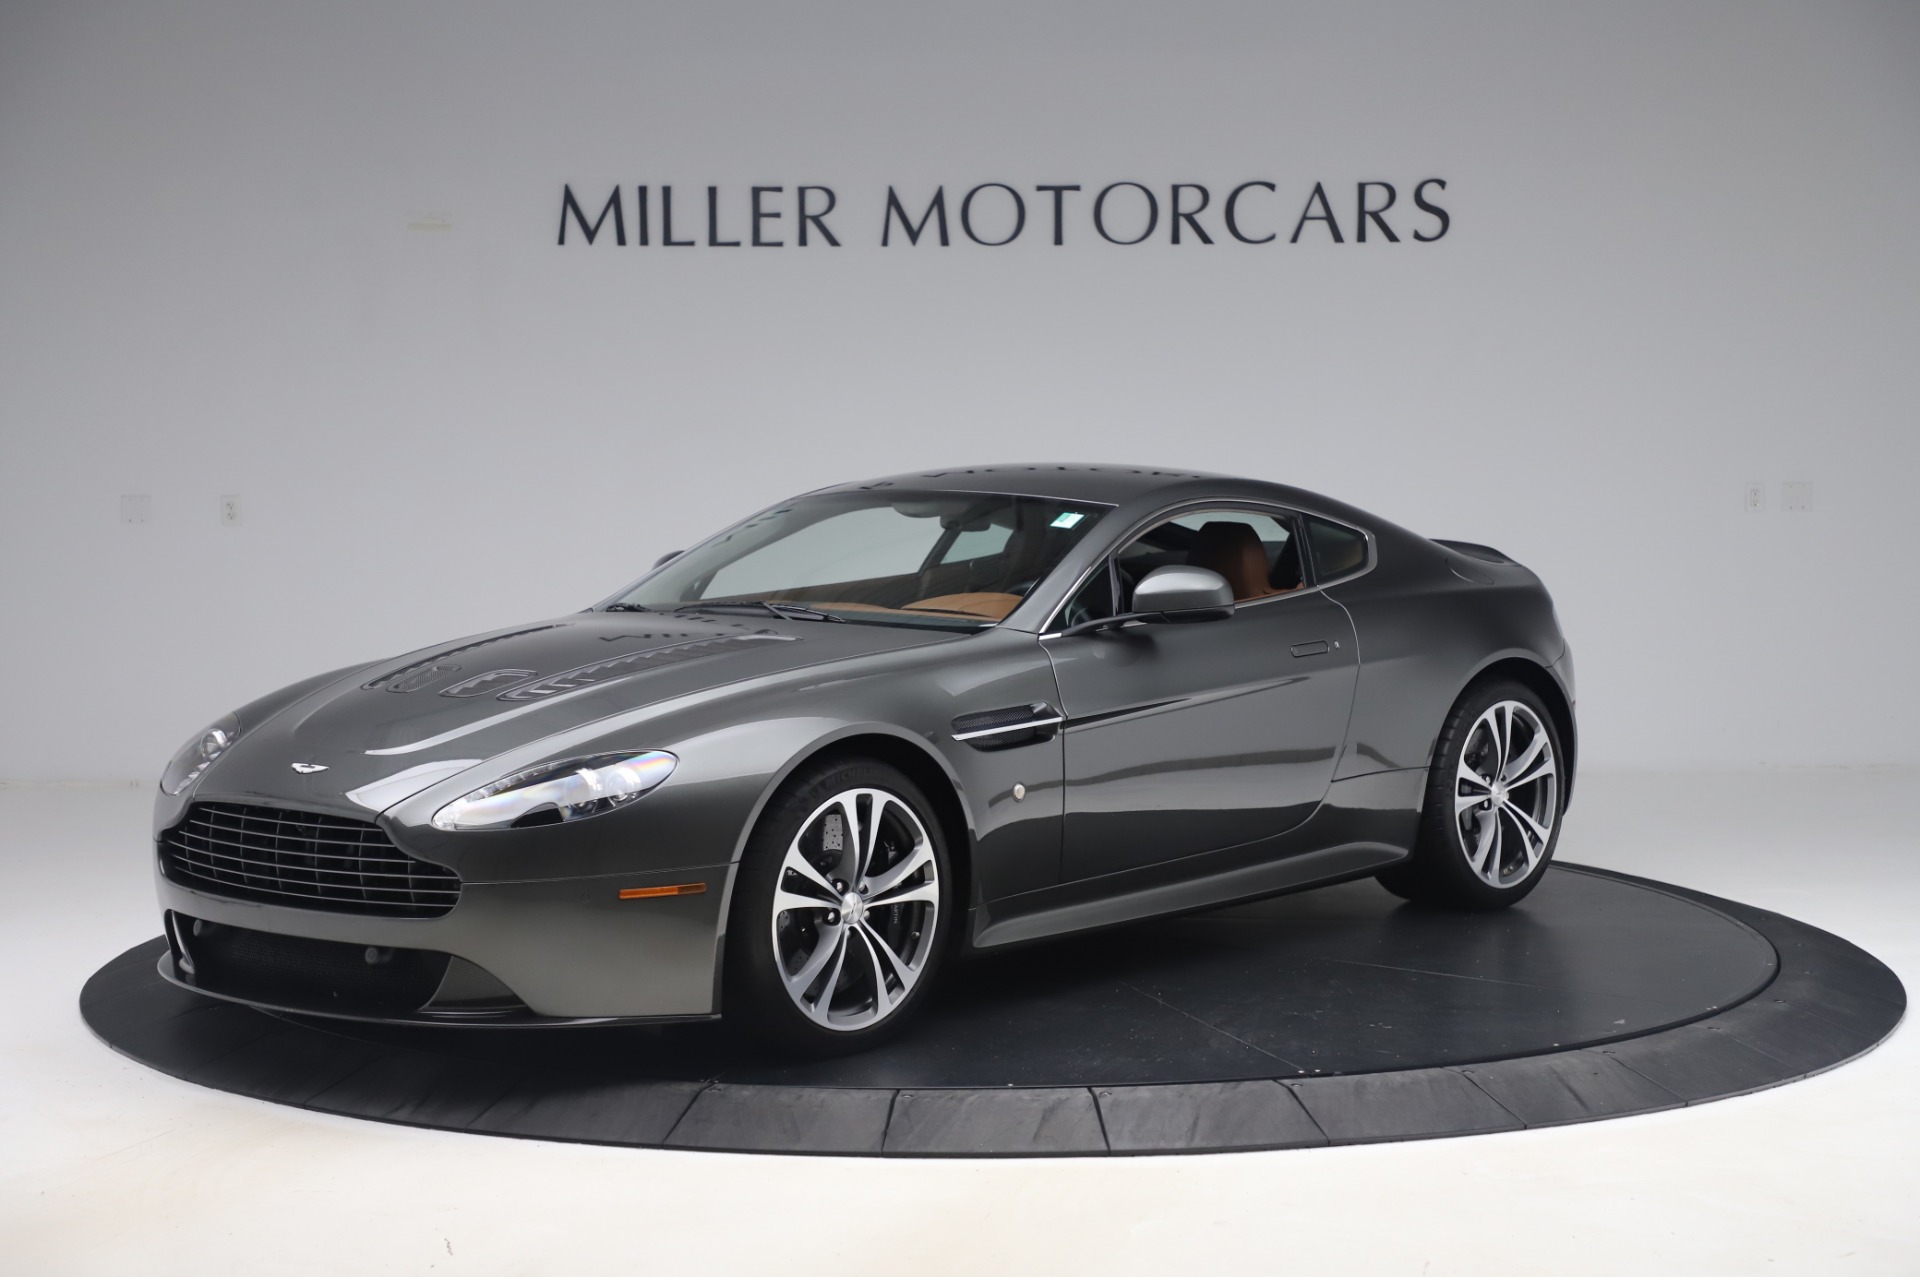 Used 2011 Aston Martin V12 Vantage Coupe for sale Sold at Alfa Romeo of Greenwich in Greenwich CT 06830 1